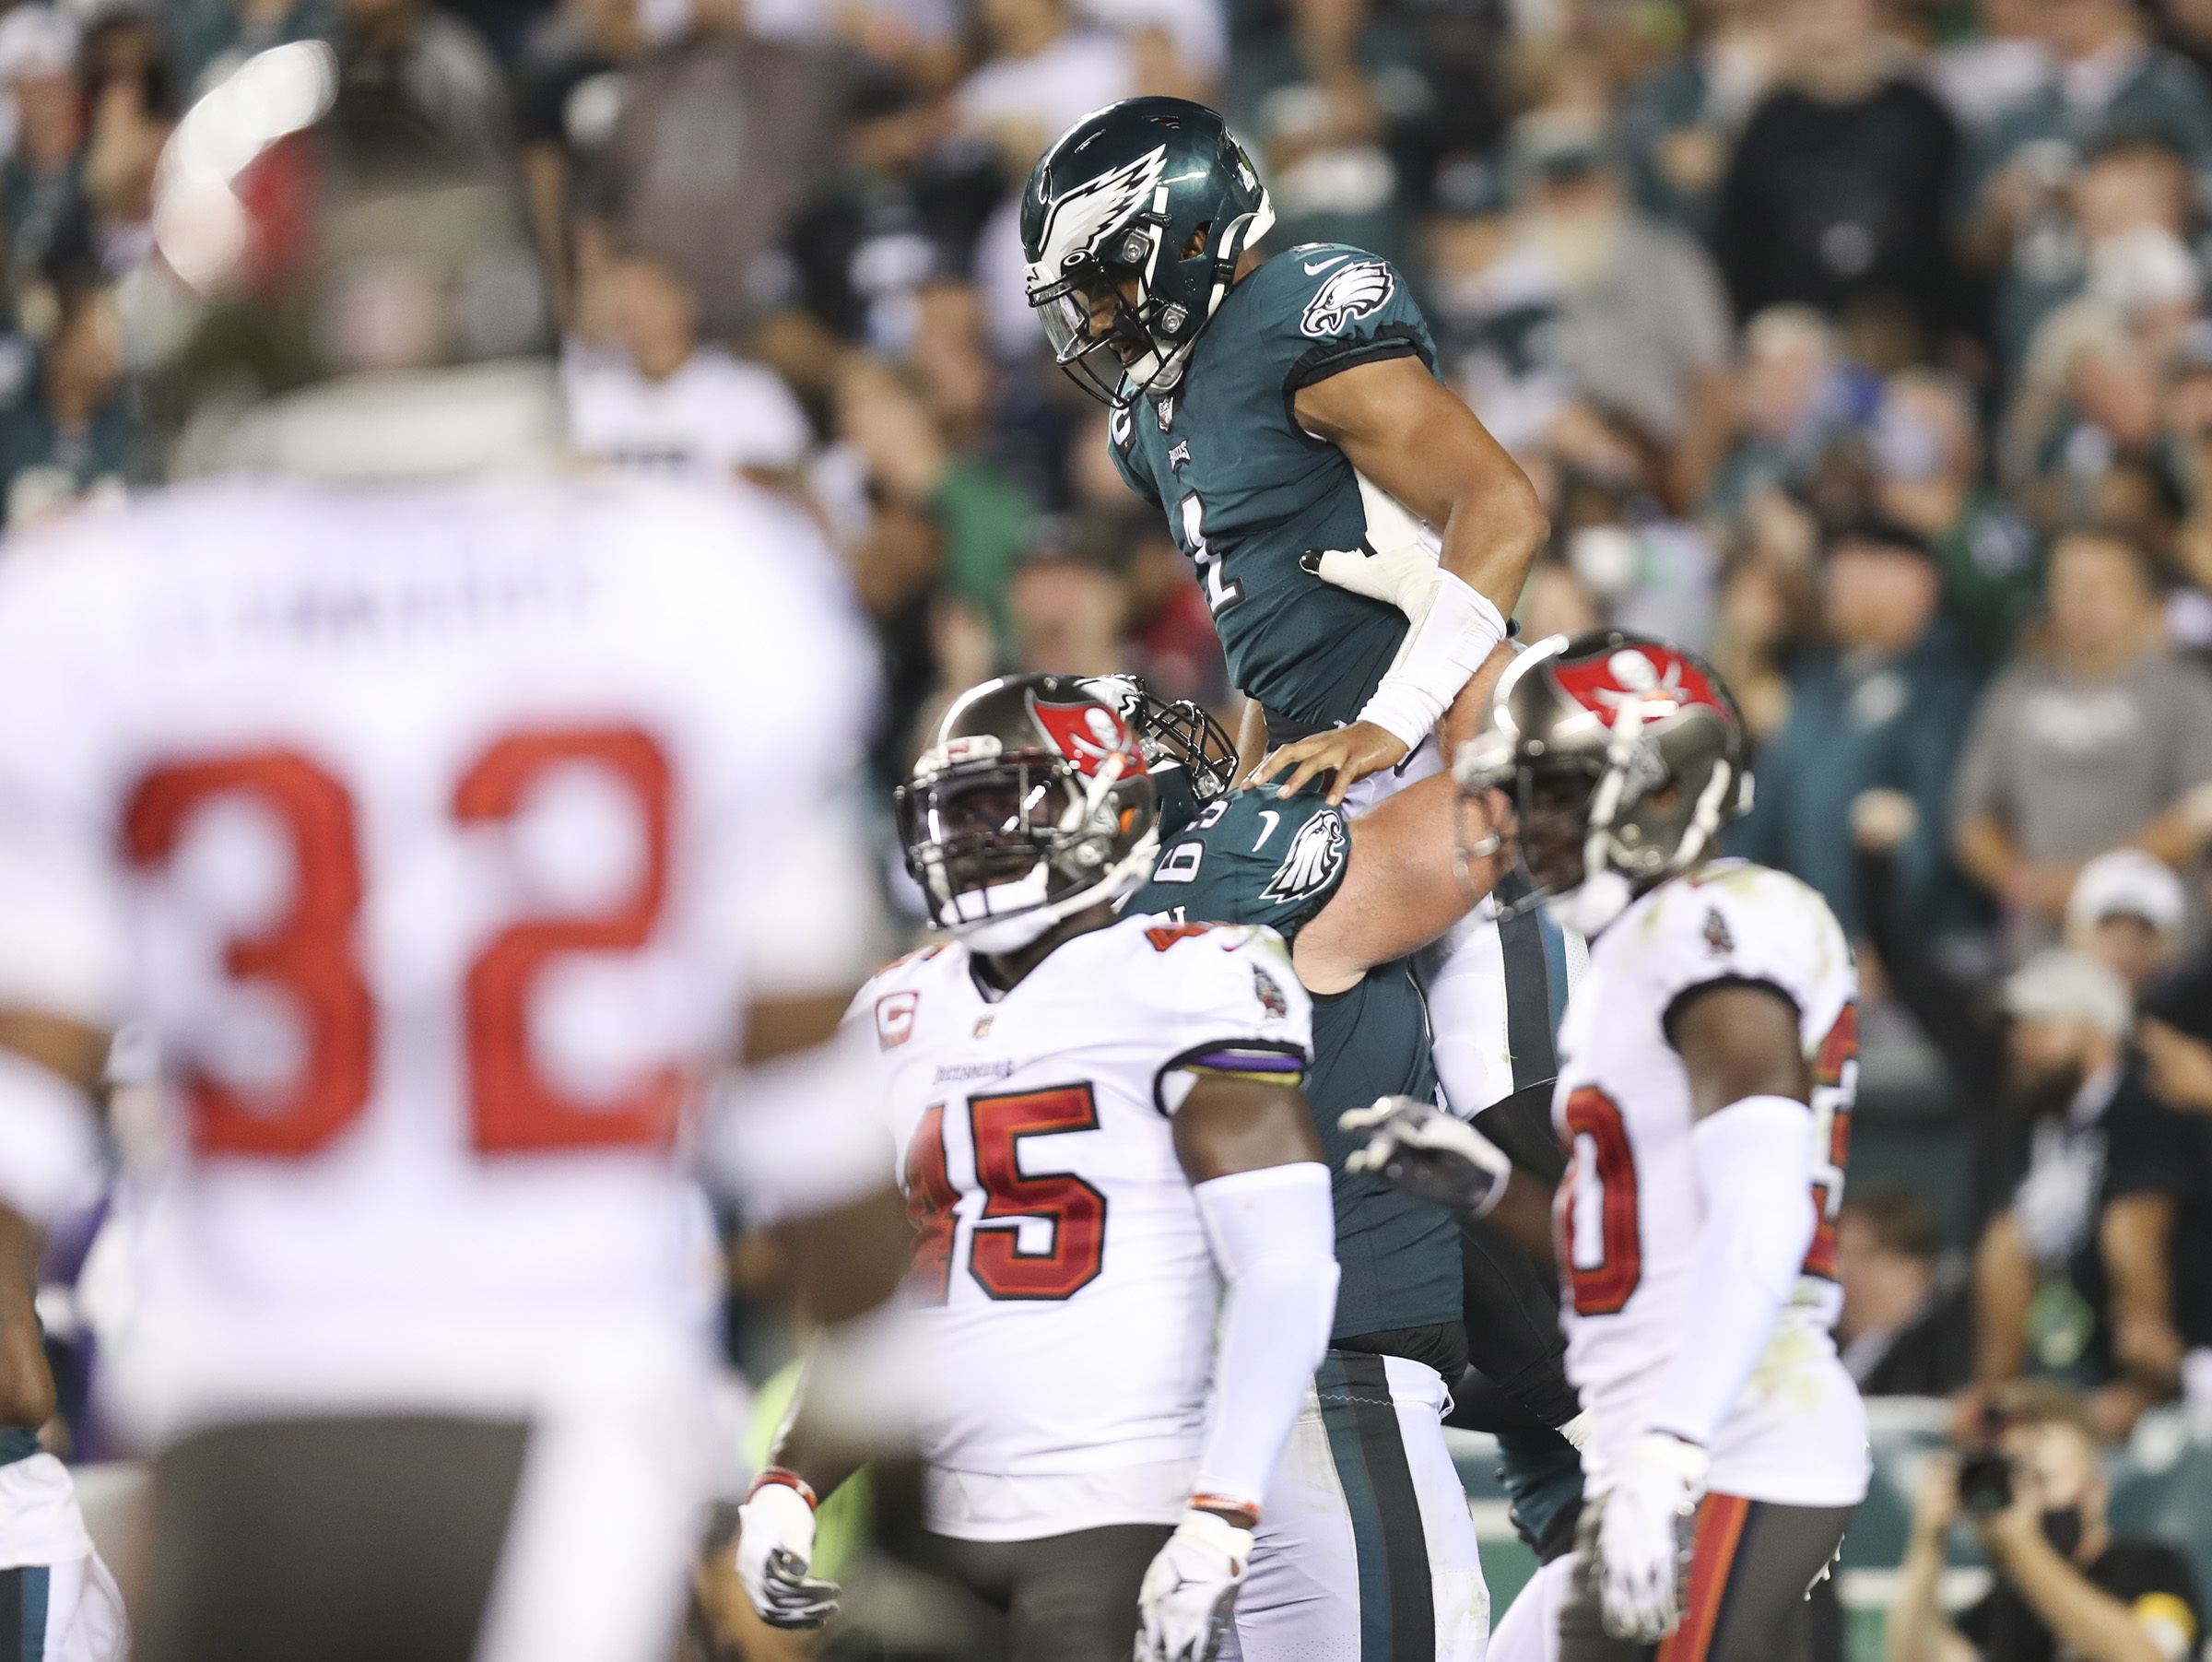 Bucs vs. Eagles: Top storylines for Tampa Bay in wild-card game